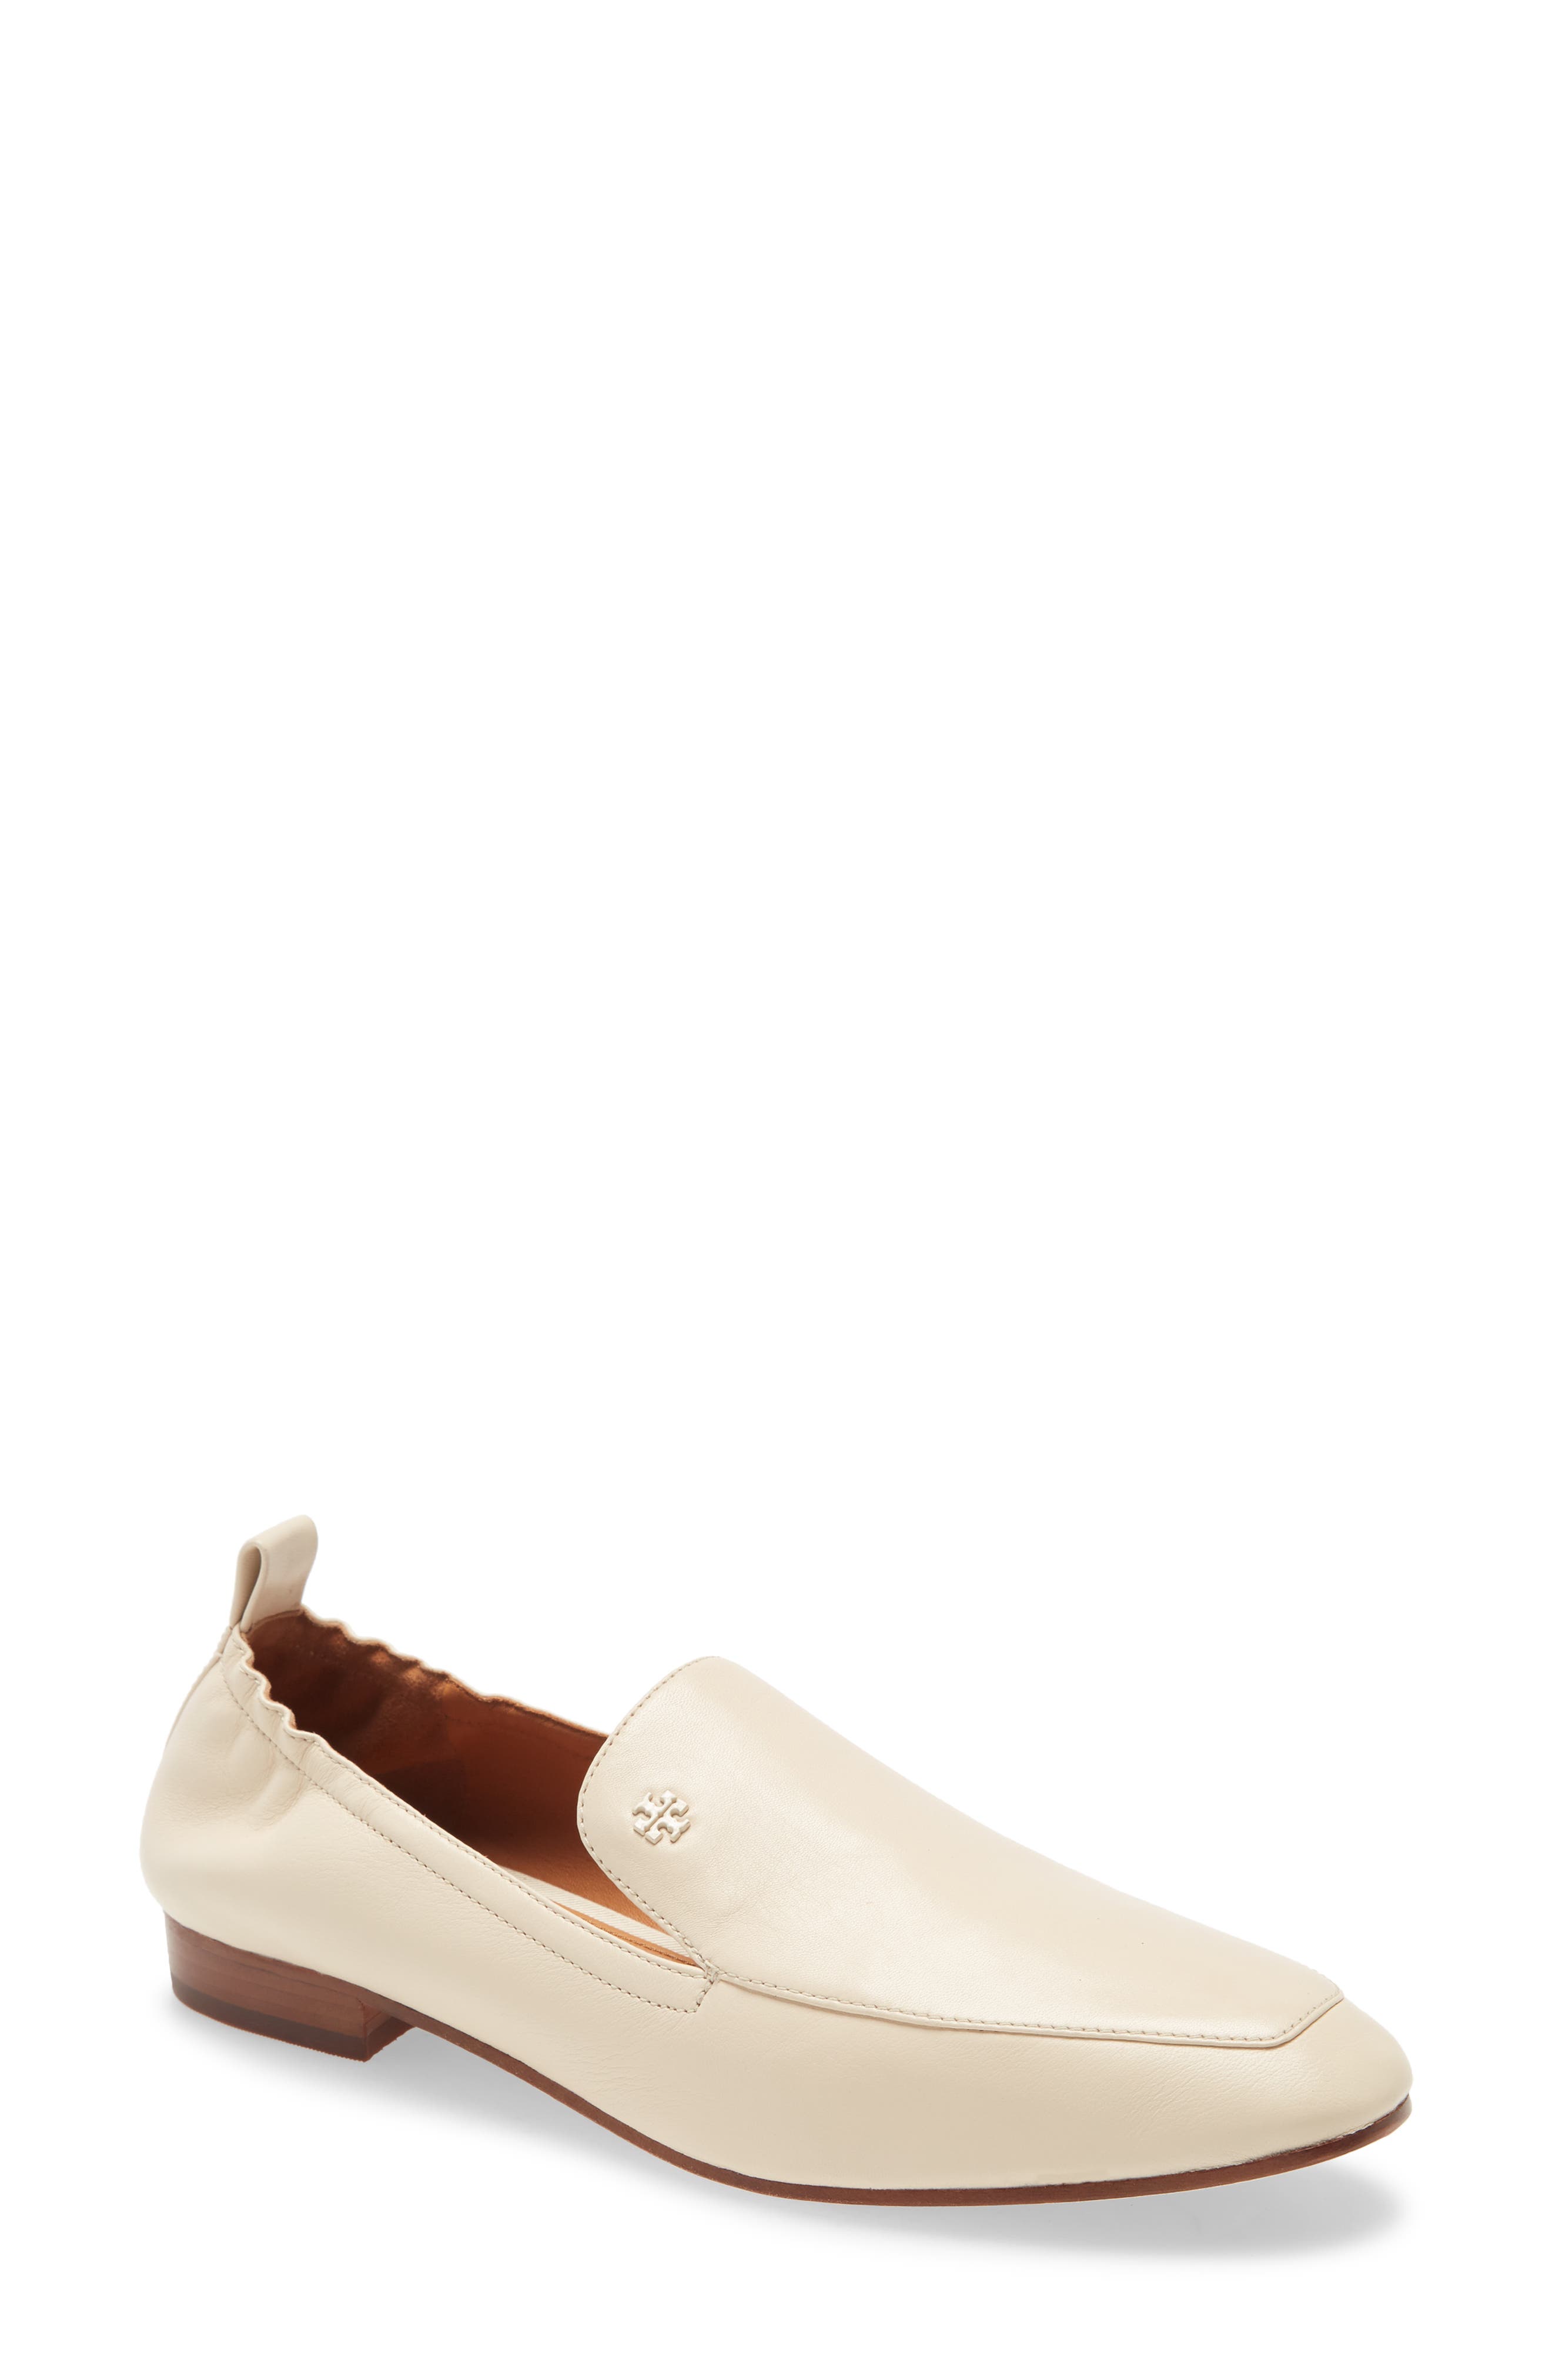 tory burch loafers nordstrom